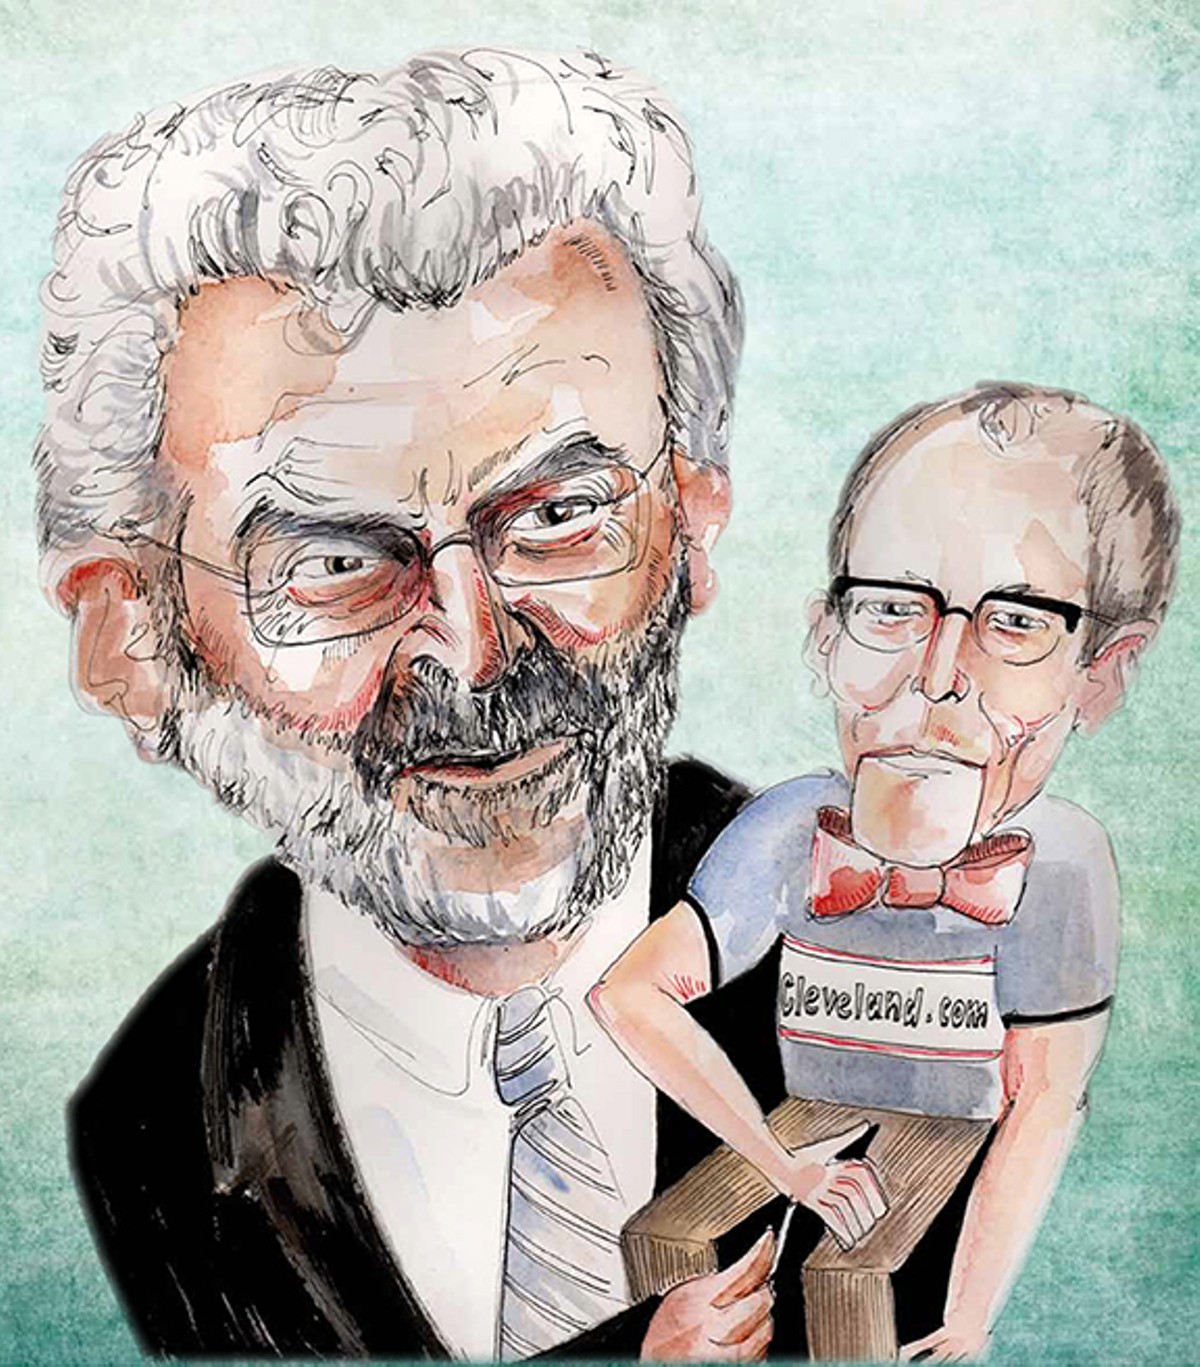 The Cozy Relationship Between Cleveland.com Editor Chris Quinn and Mayor Frank Jackson, And What It Means For Coverage of City Hall